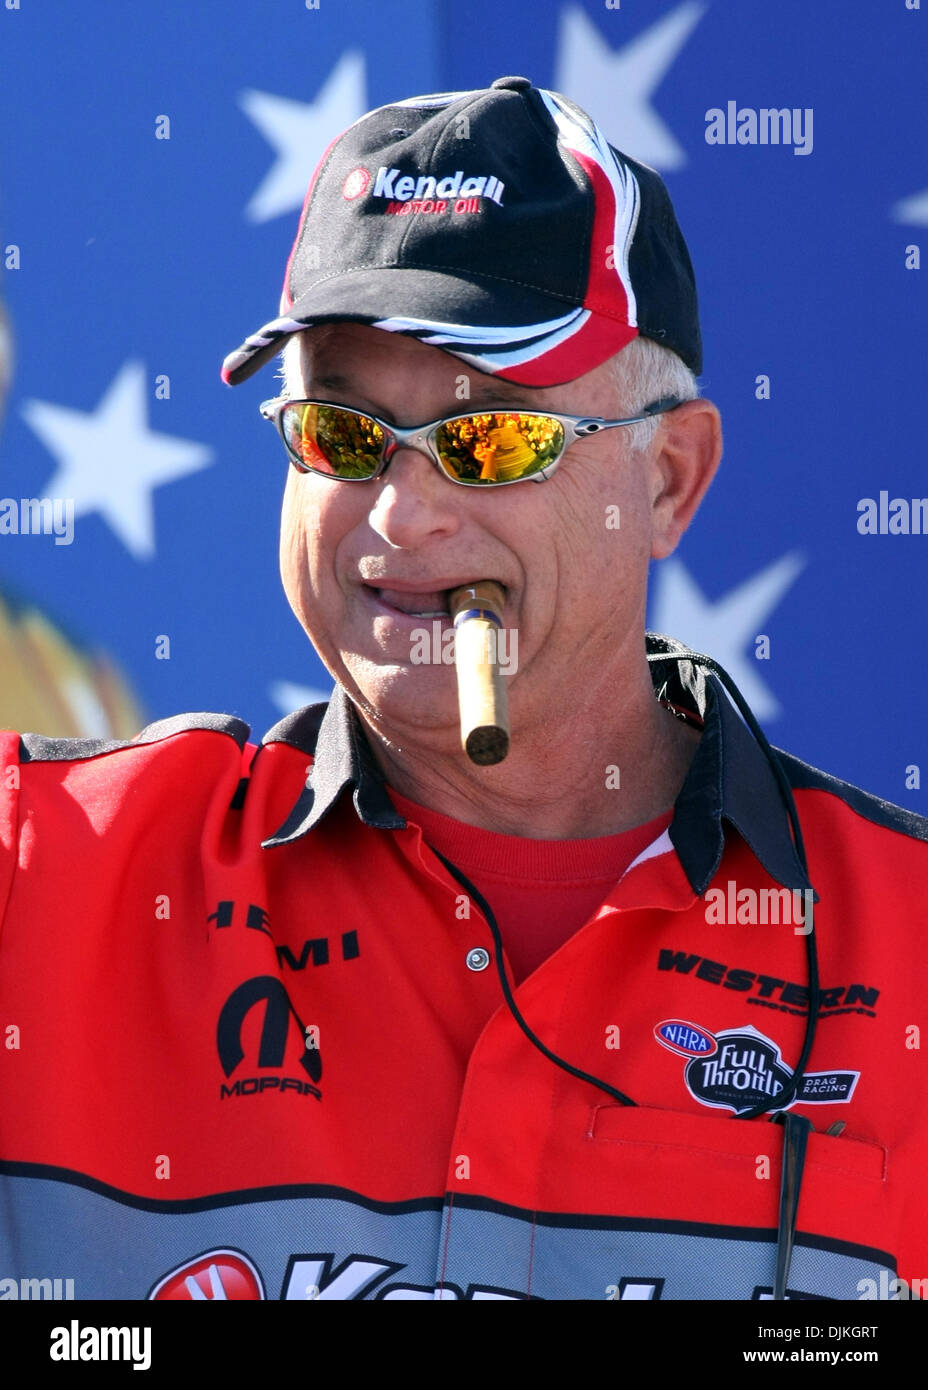 Sept. 6, 2010 - Indianapolis, Indiana, United States of America - 06 September2010: V Gaines walks out with his cigar. The U.S. Nationals were held at O'Reilly Raceway Park in Indianapolis, Indiana. (Credit Image: © Alan Ashley/Southcreek Global/ZUMApress.com) Stock Photo